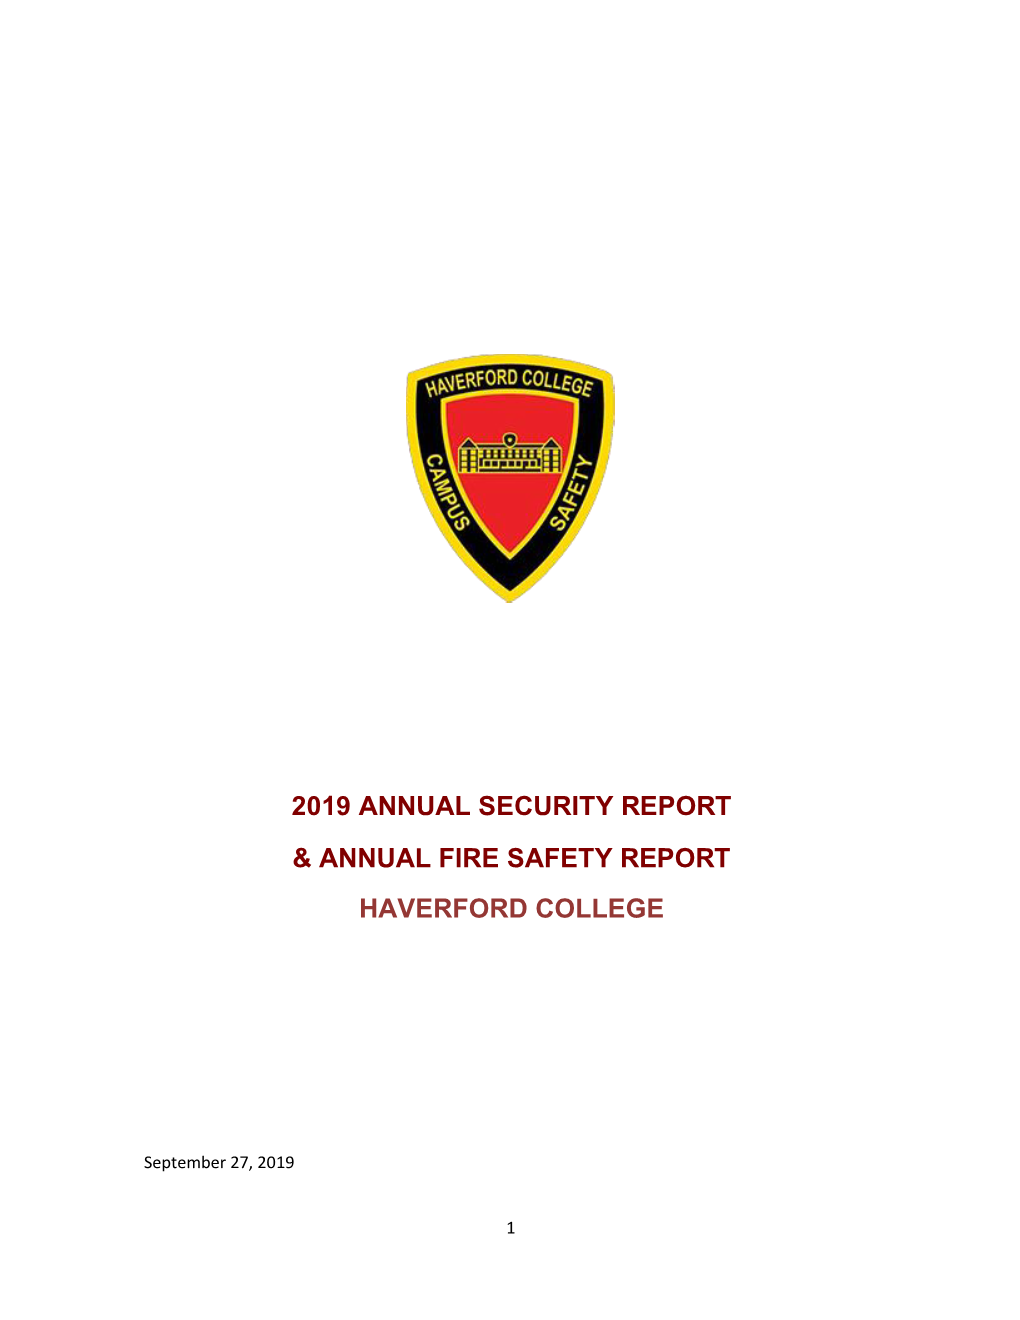 2019 Annual Security Report & Annual Fire Safety Report Haverford College